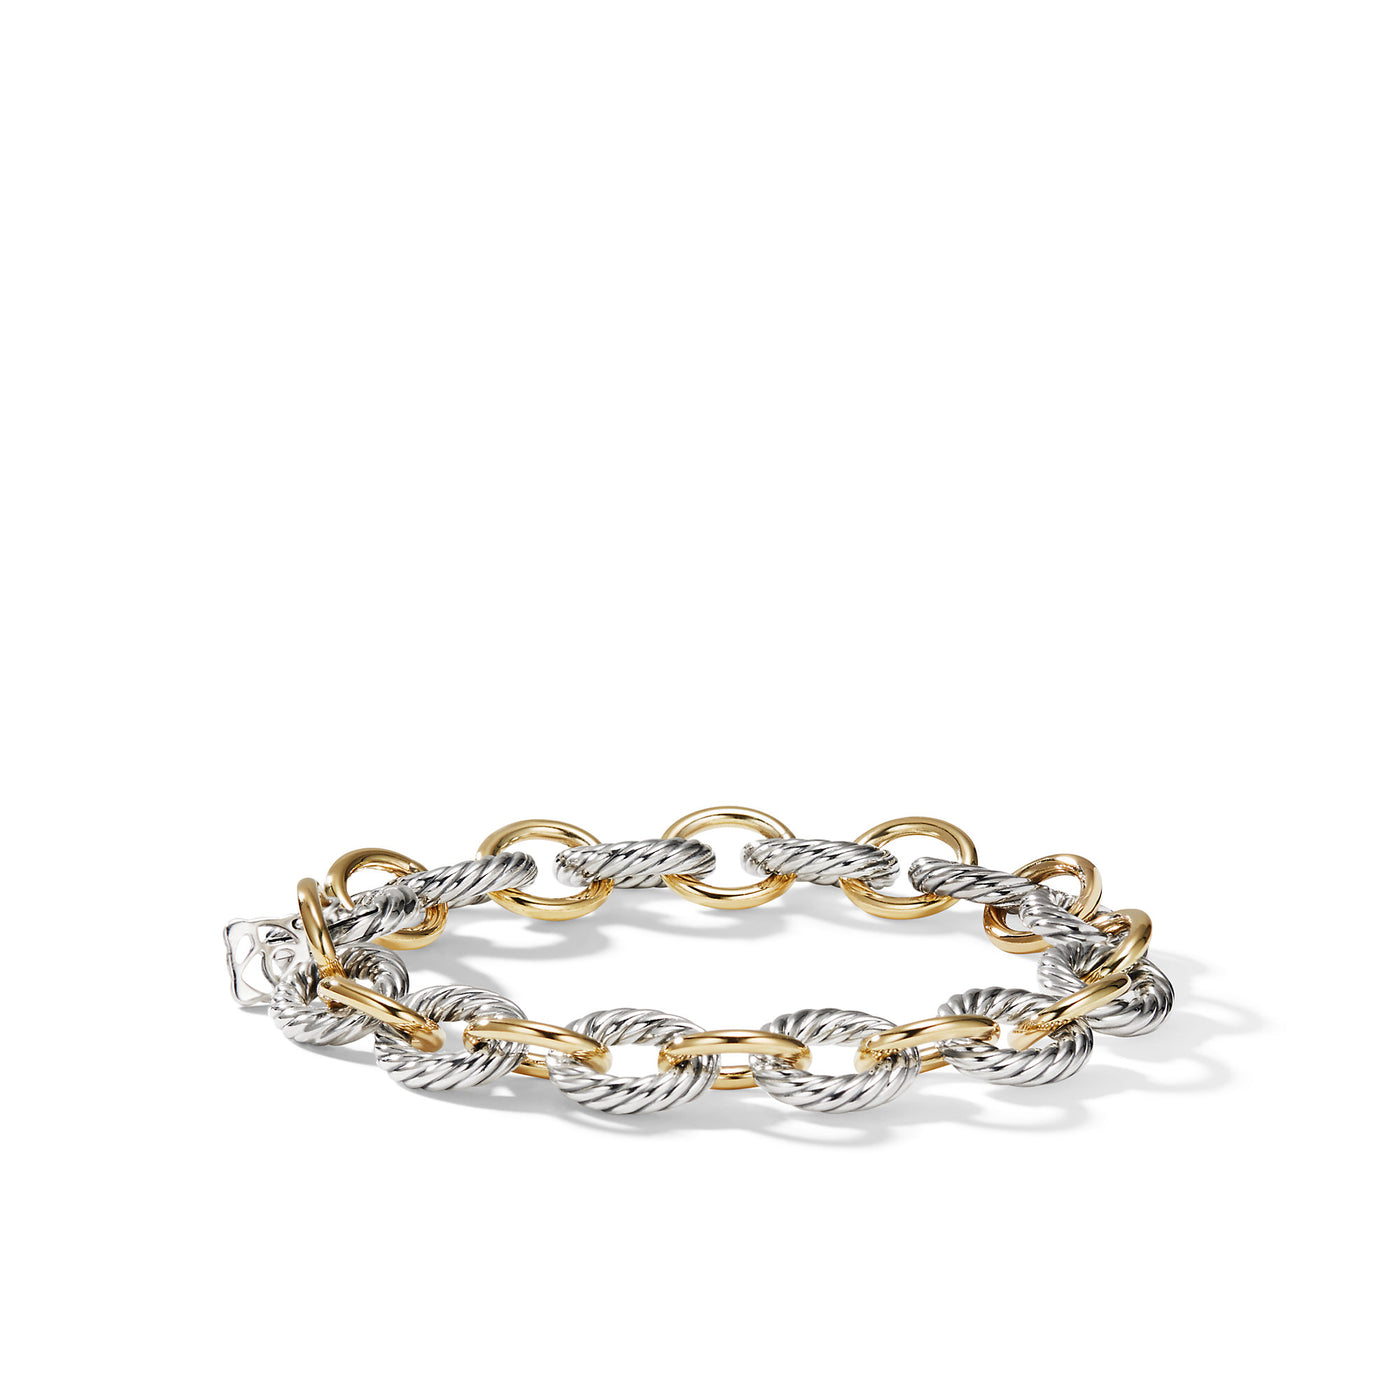 Oval Link Chain Bracelet in Sterling Silver with 18K Yellow Gold\, 10mm